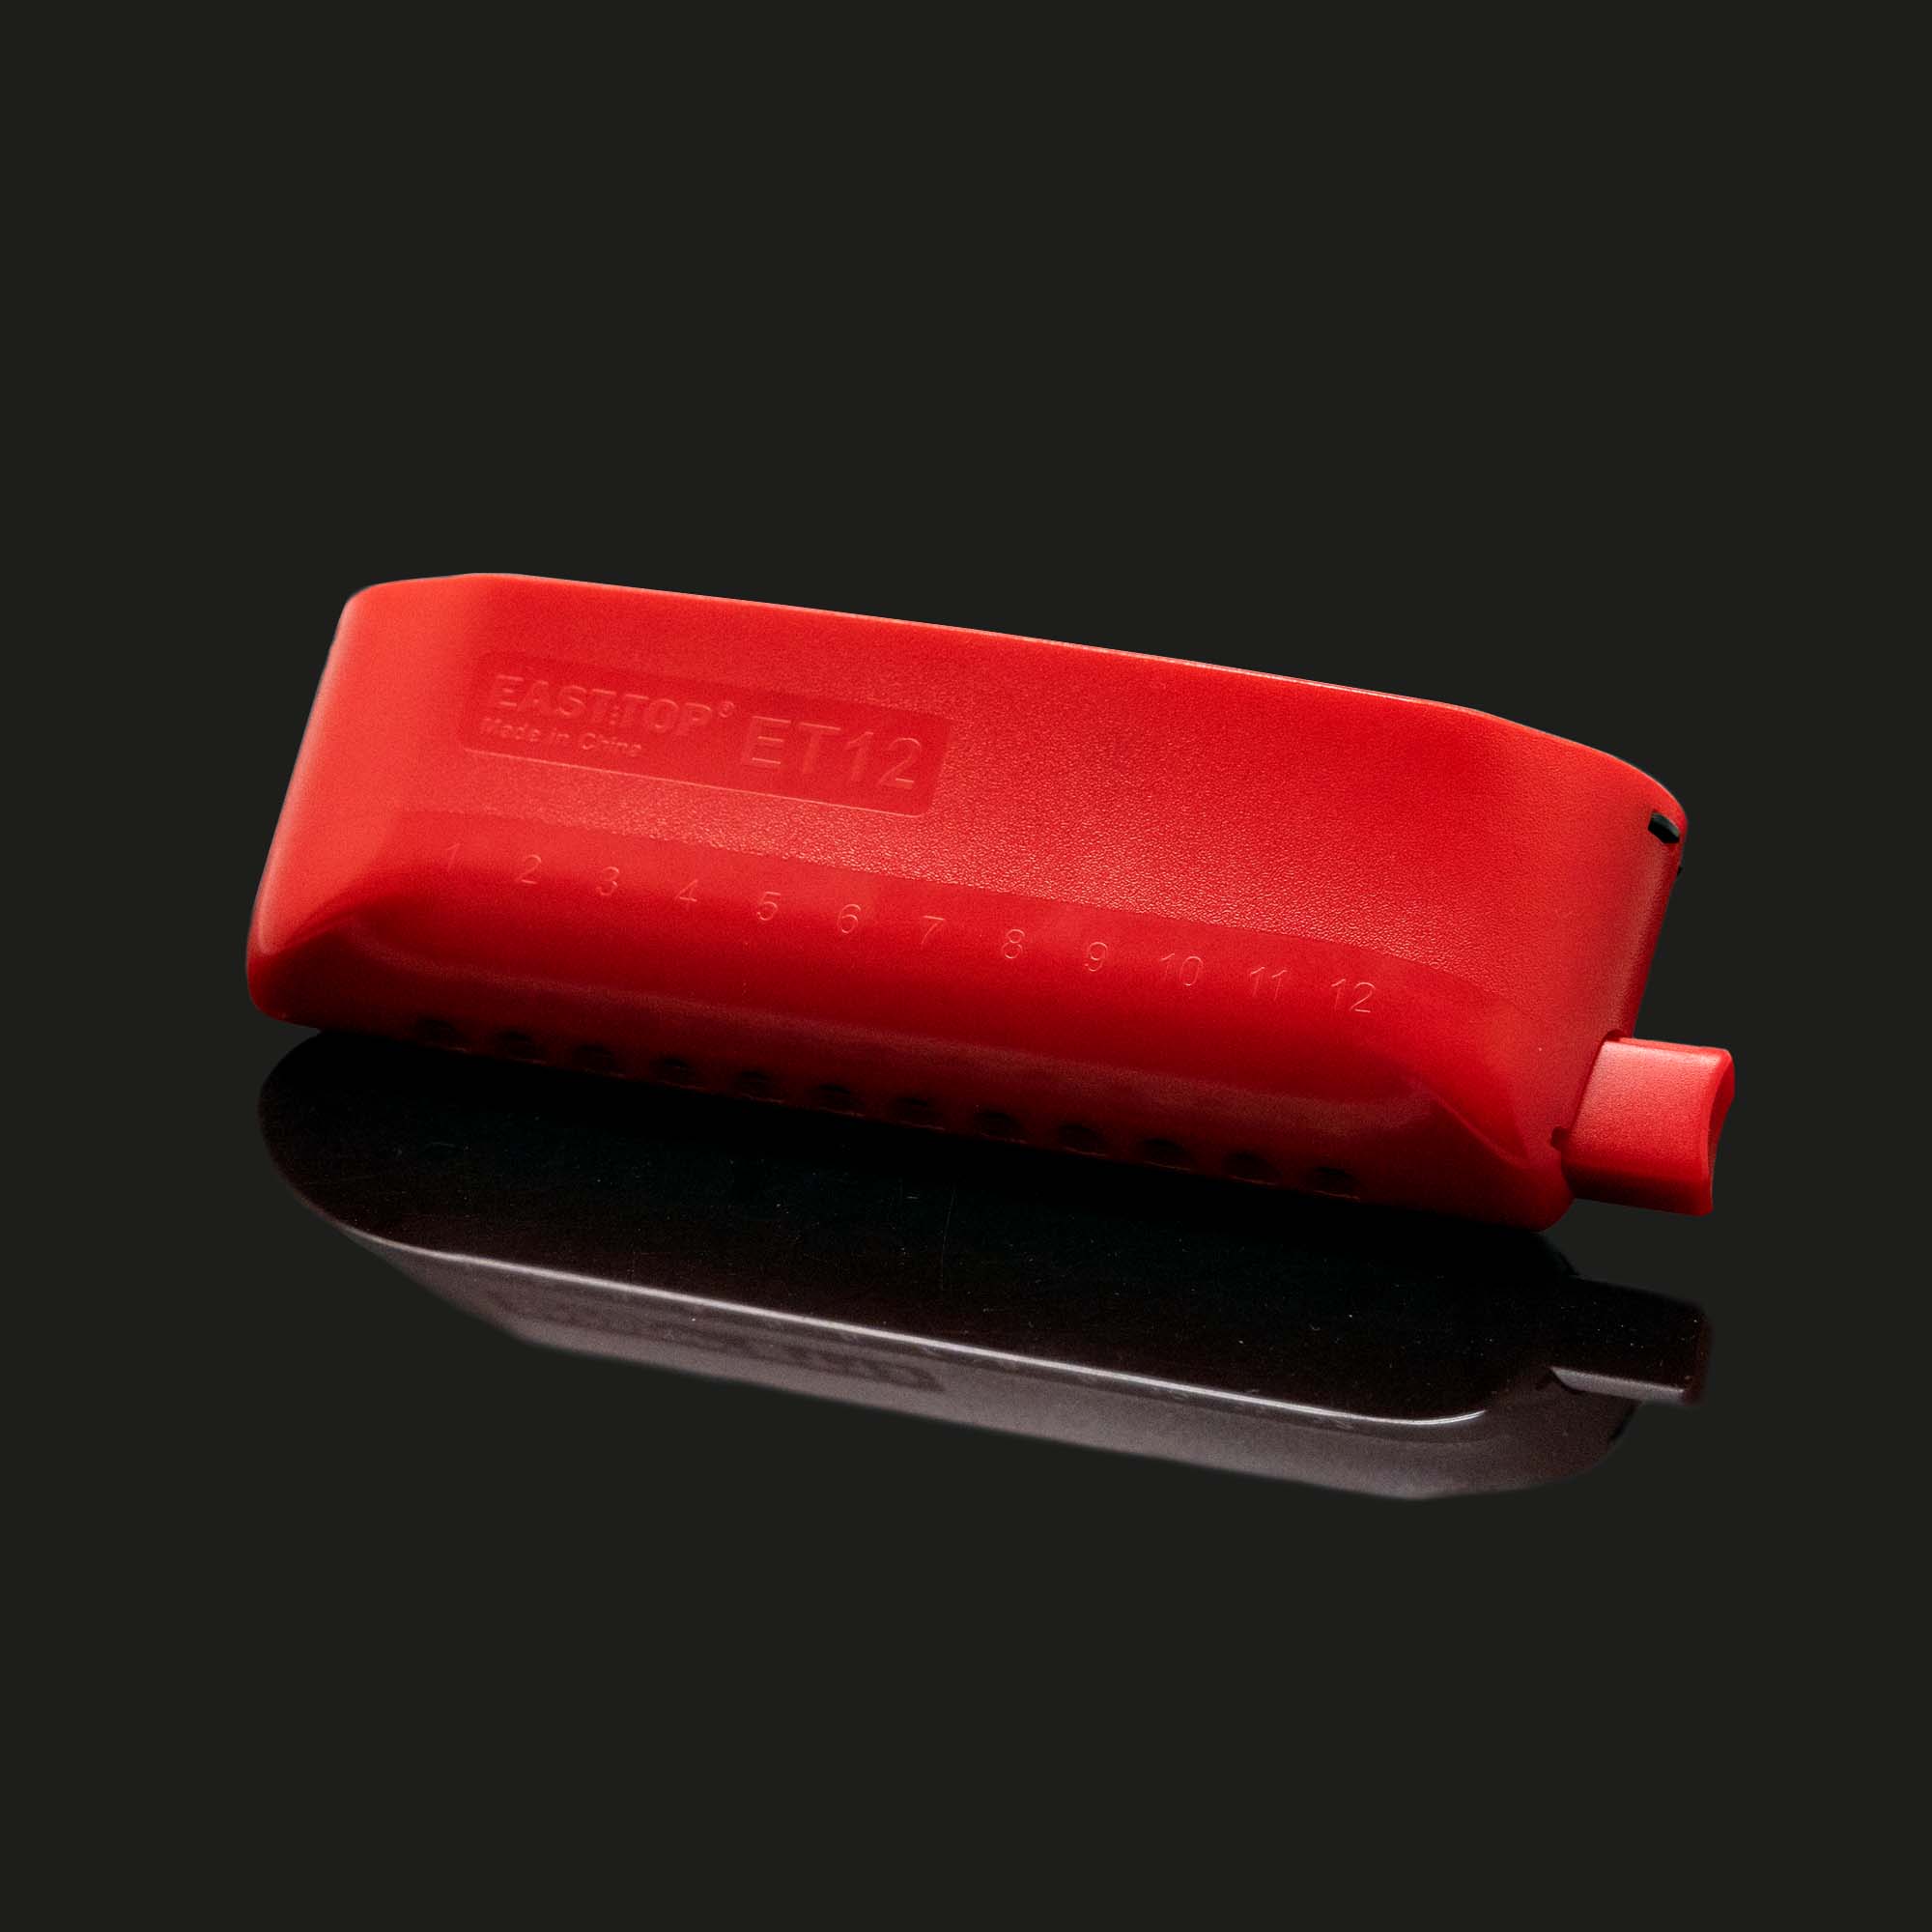 Exclusive Offering: Easttop Harmonica ET12 2024 New Year Limited Edition - Chinese Red, Key of C. Only 30 Available on this Online Store! Ship via FedEx(ET12-RED) Order now and receive a free 8-hole harmonica valued at $9.99 USD - Easttop harmonica